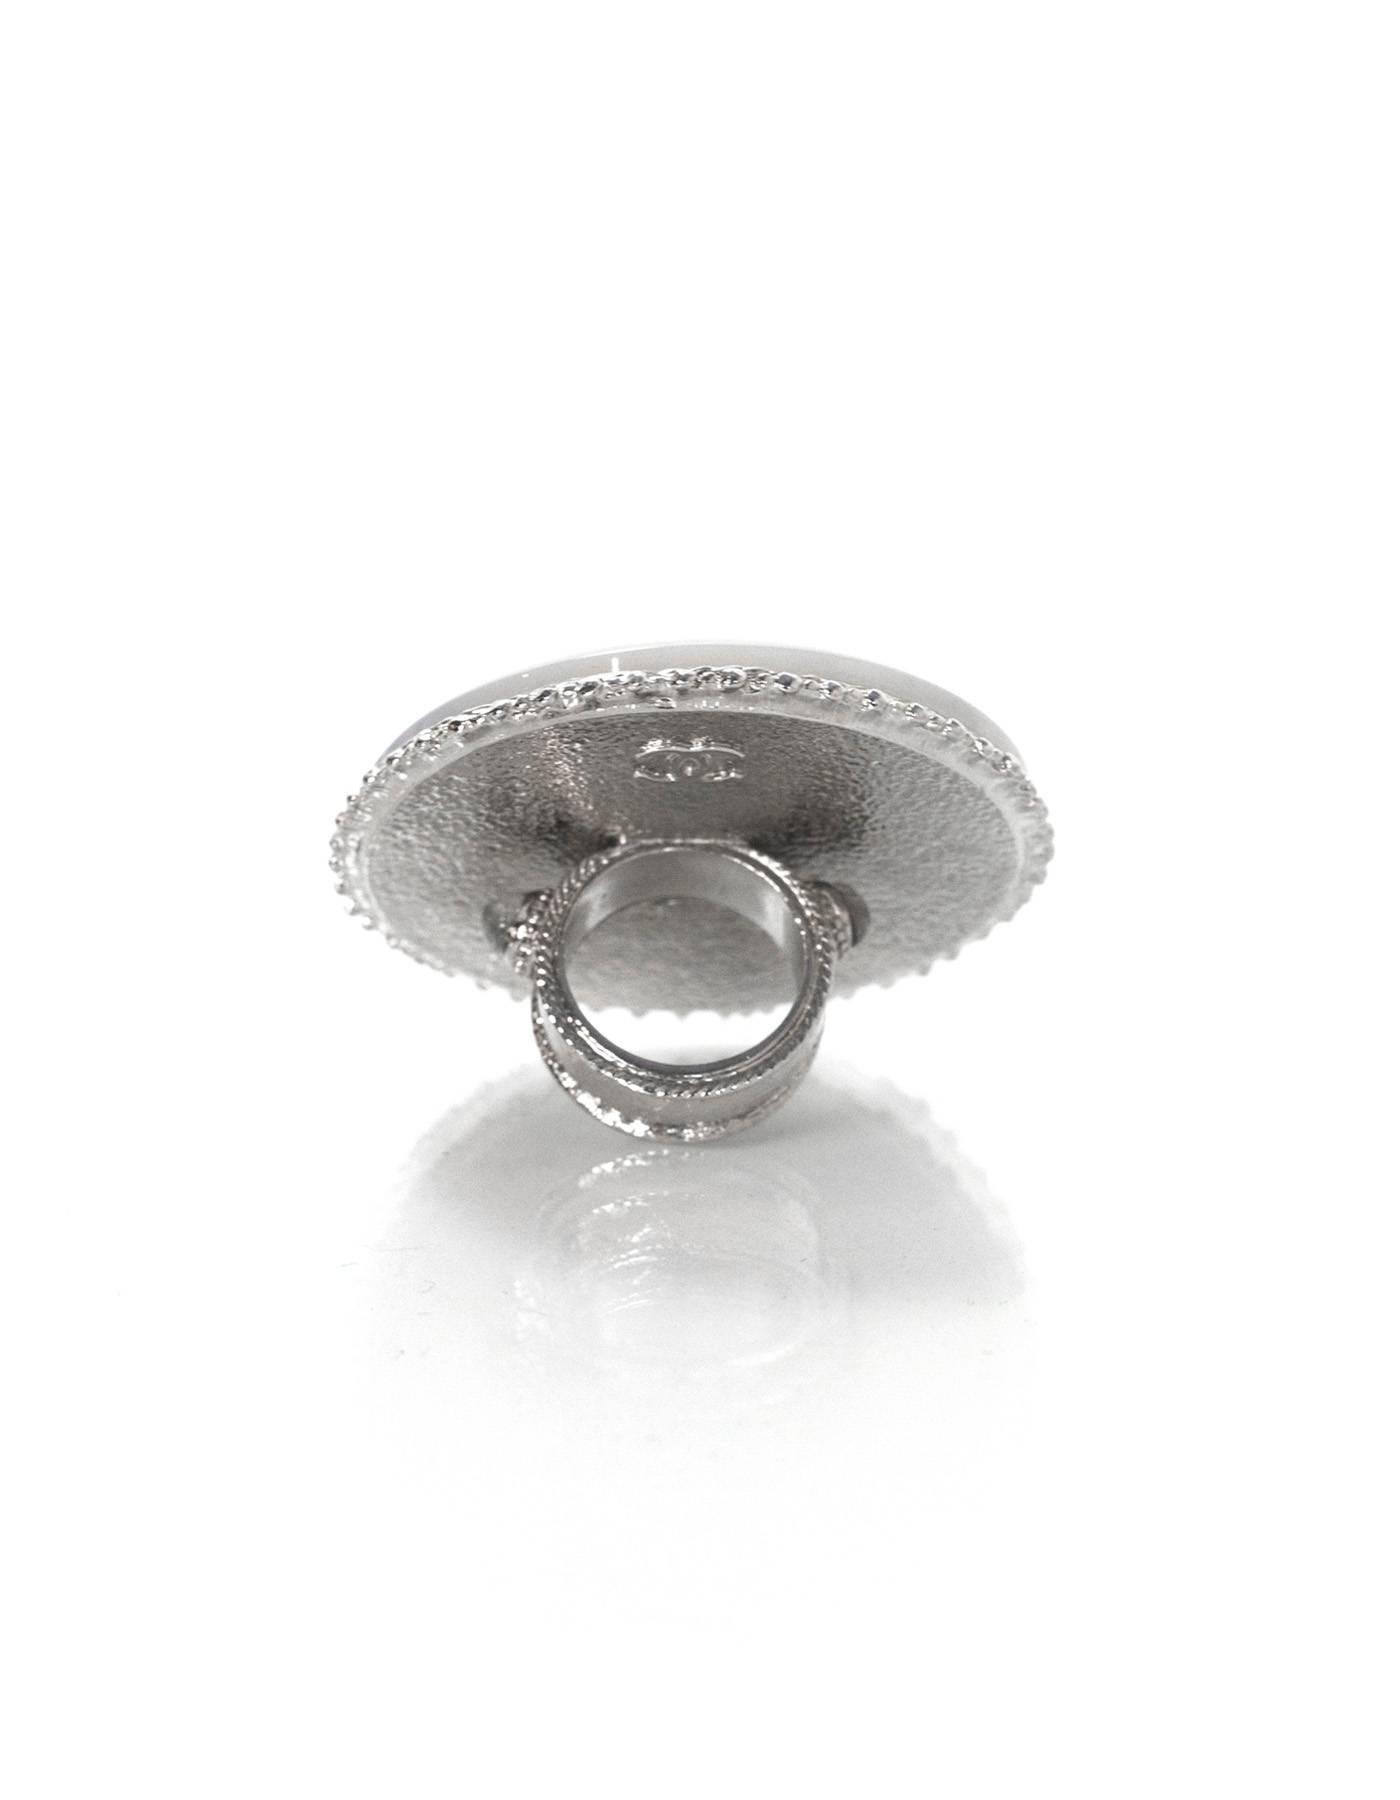 Women's Chanel XL Cocktail Ring Sz 6.5